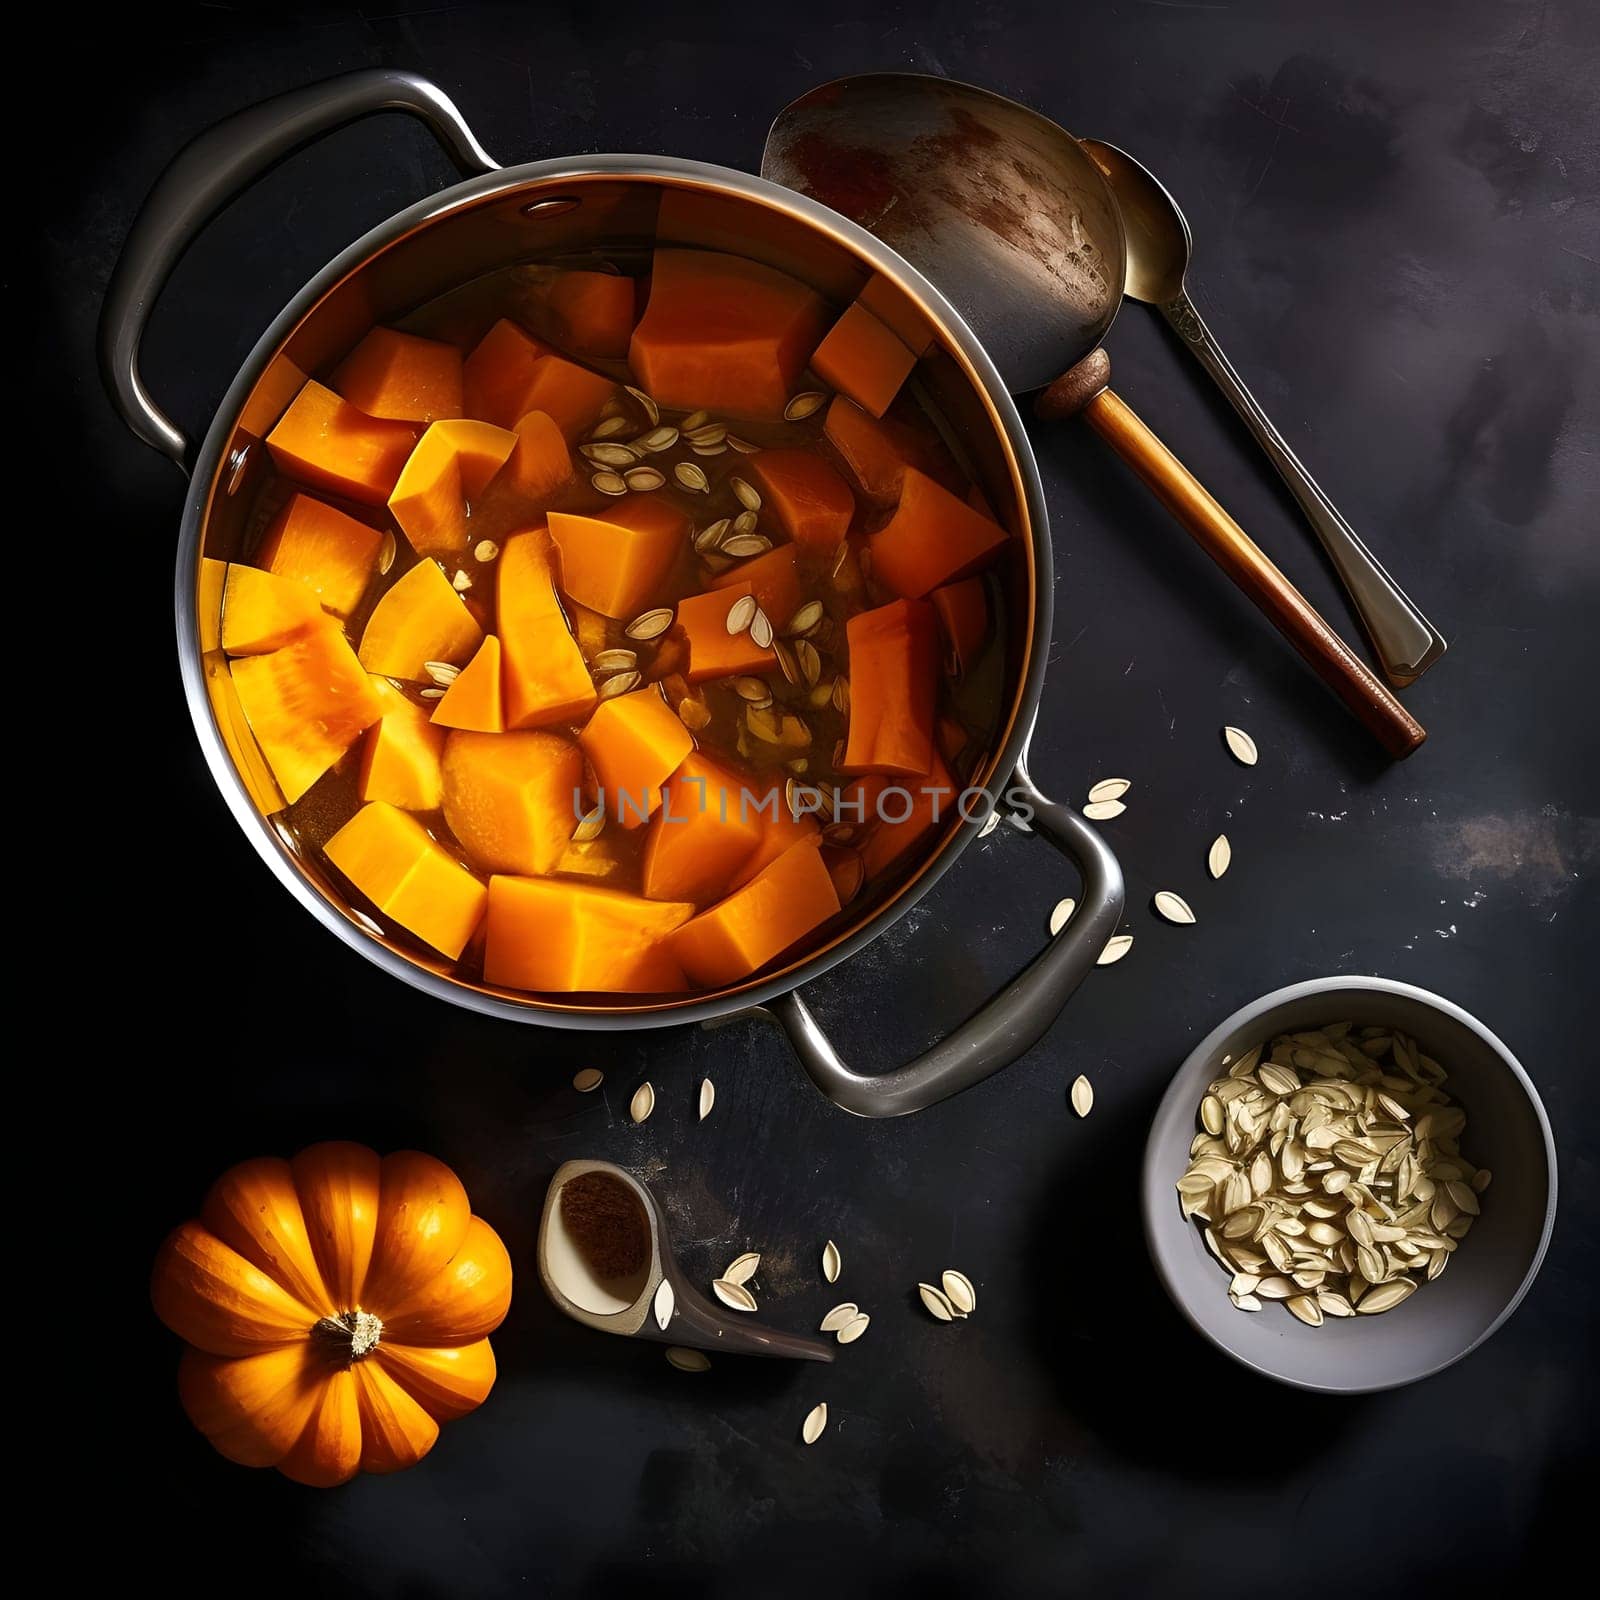 Top view of pumpkin soup around seeds and pumpkins dark background. Pumpkin as a dish of thanksgiving for the harvest. by ThemesS